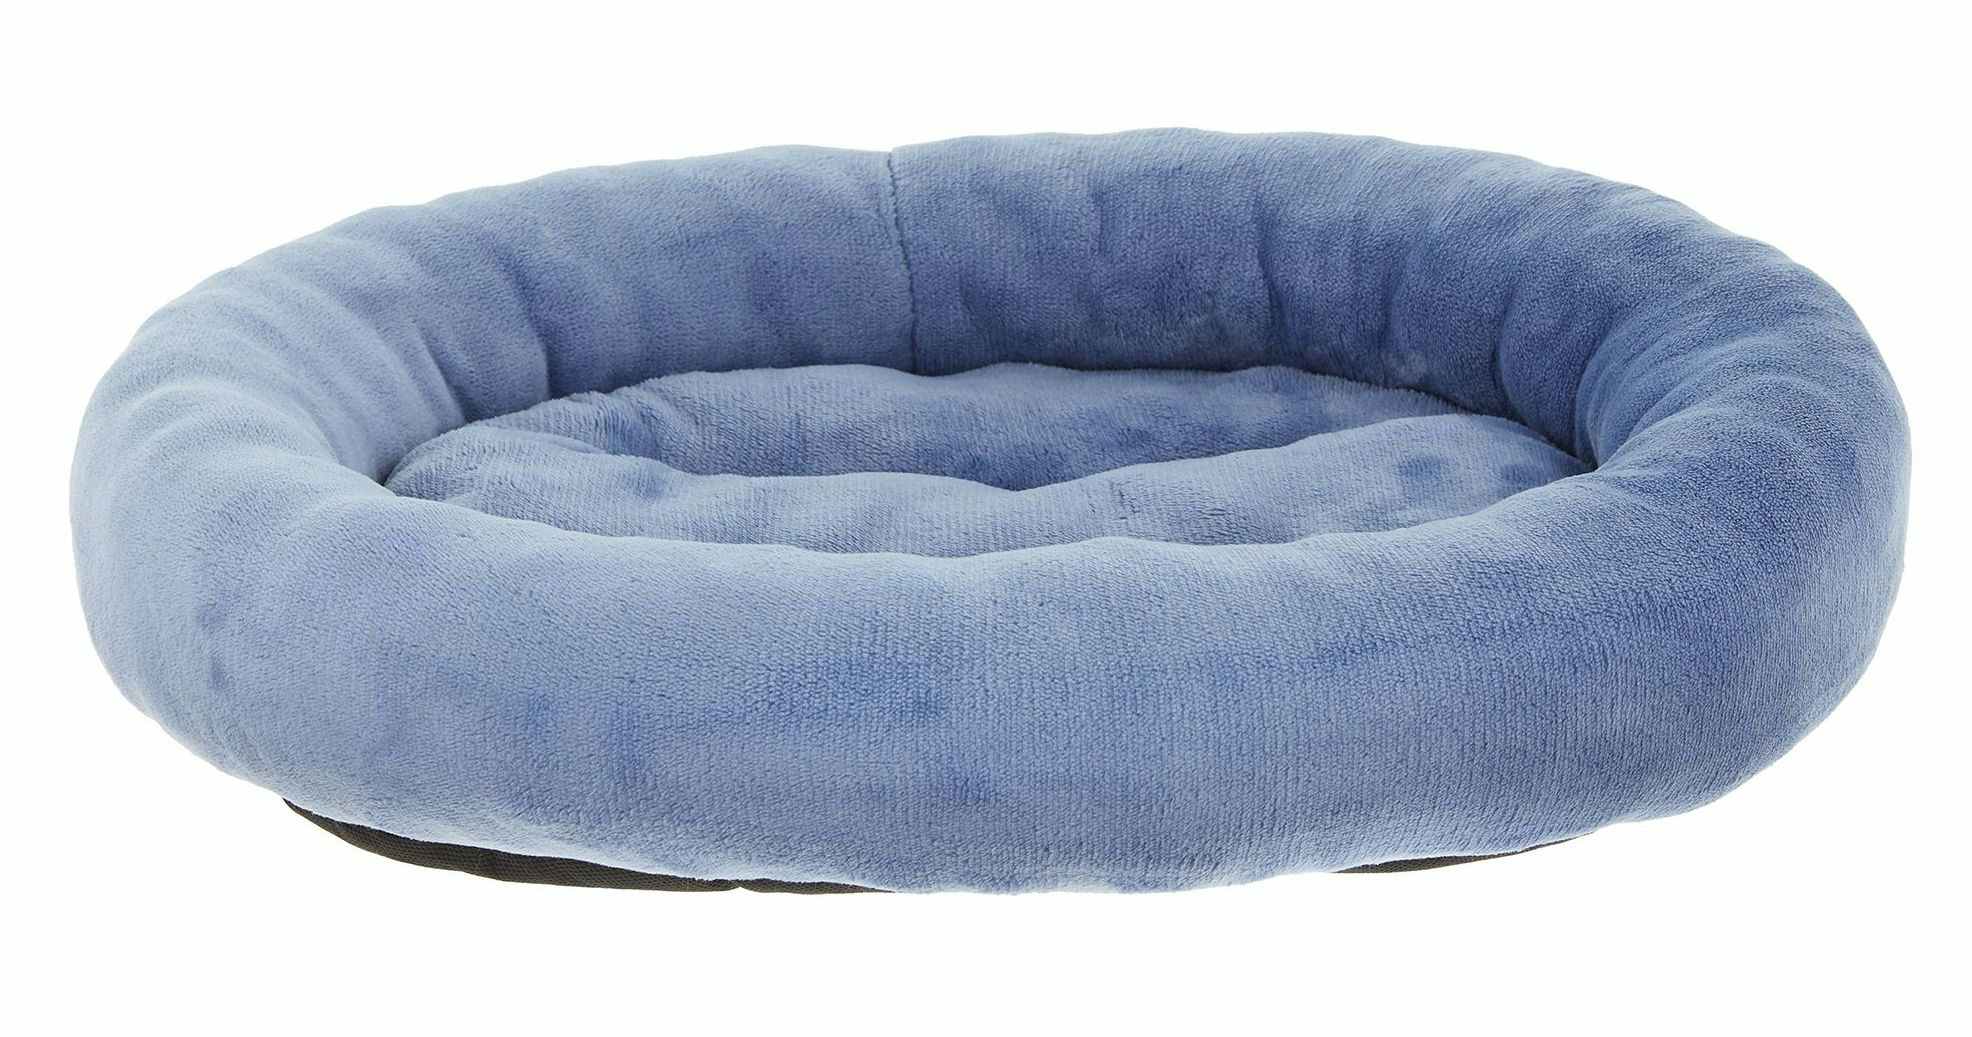 a blue cuddler style cat bed